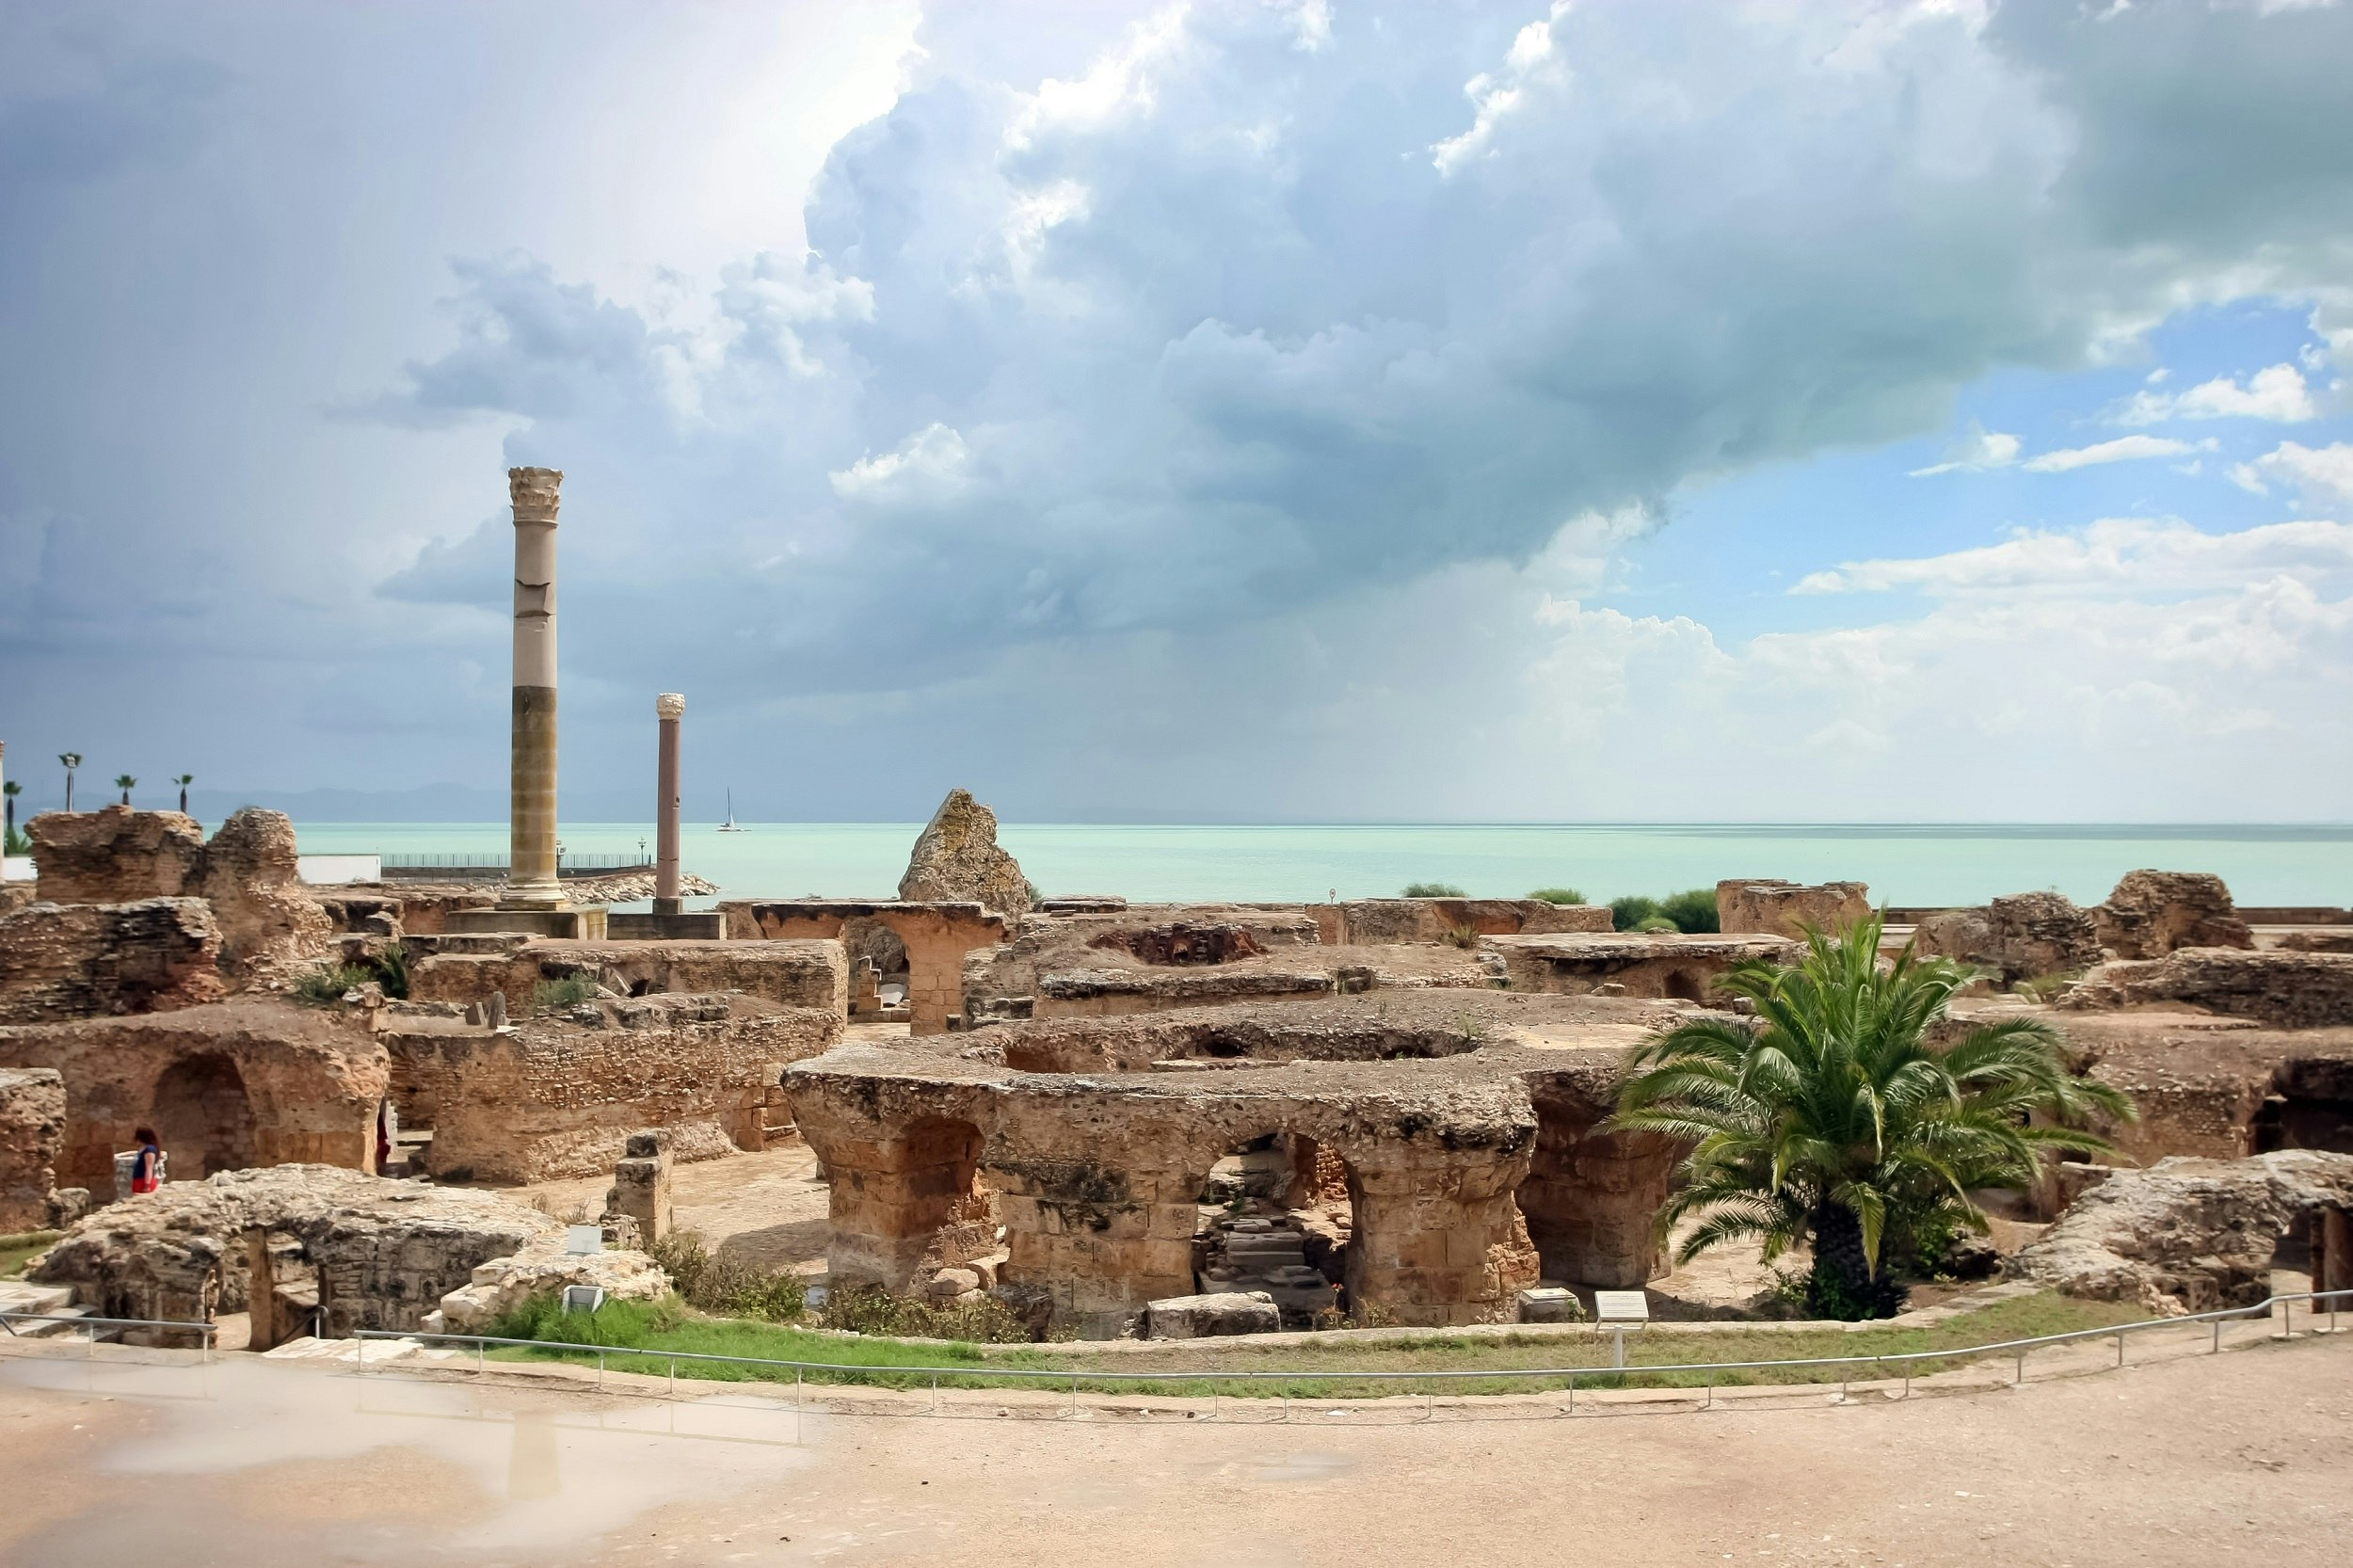 The image looks across a series of thick stone arches and two stone columns towards the sea, which has a thick thunder cloud over it.